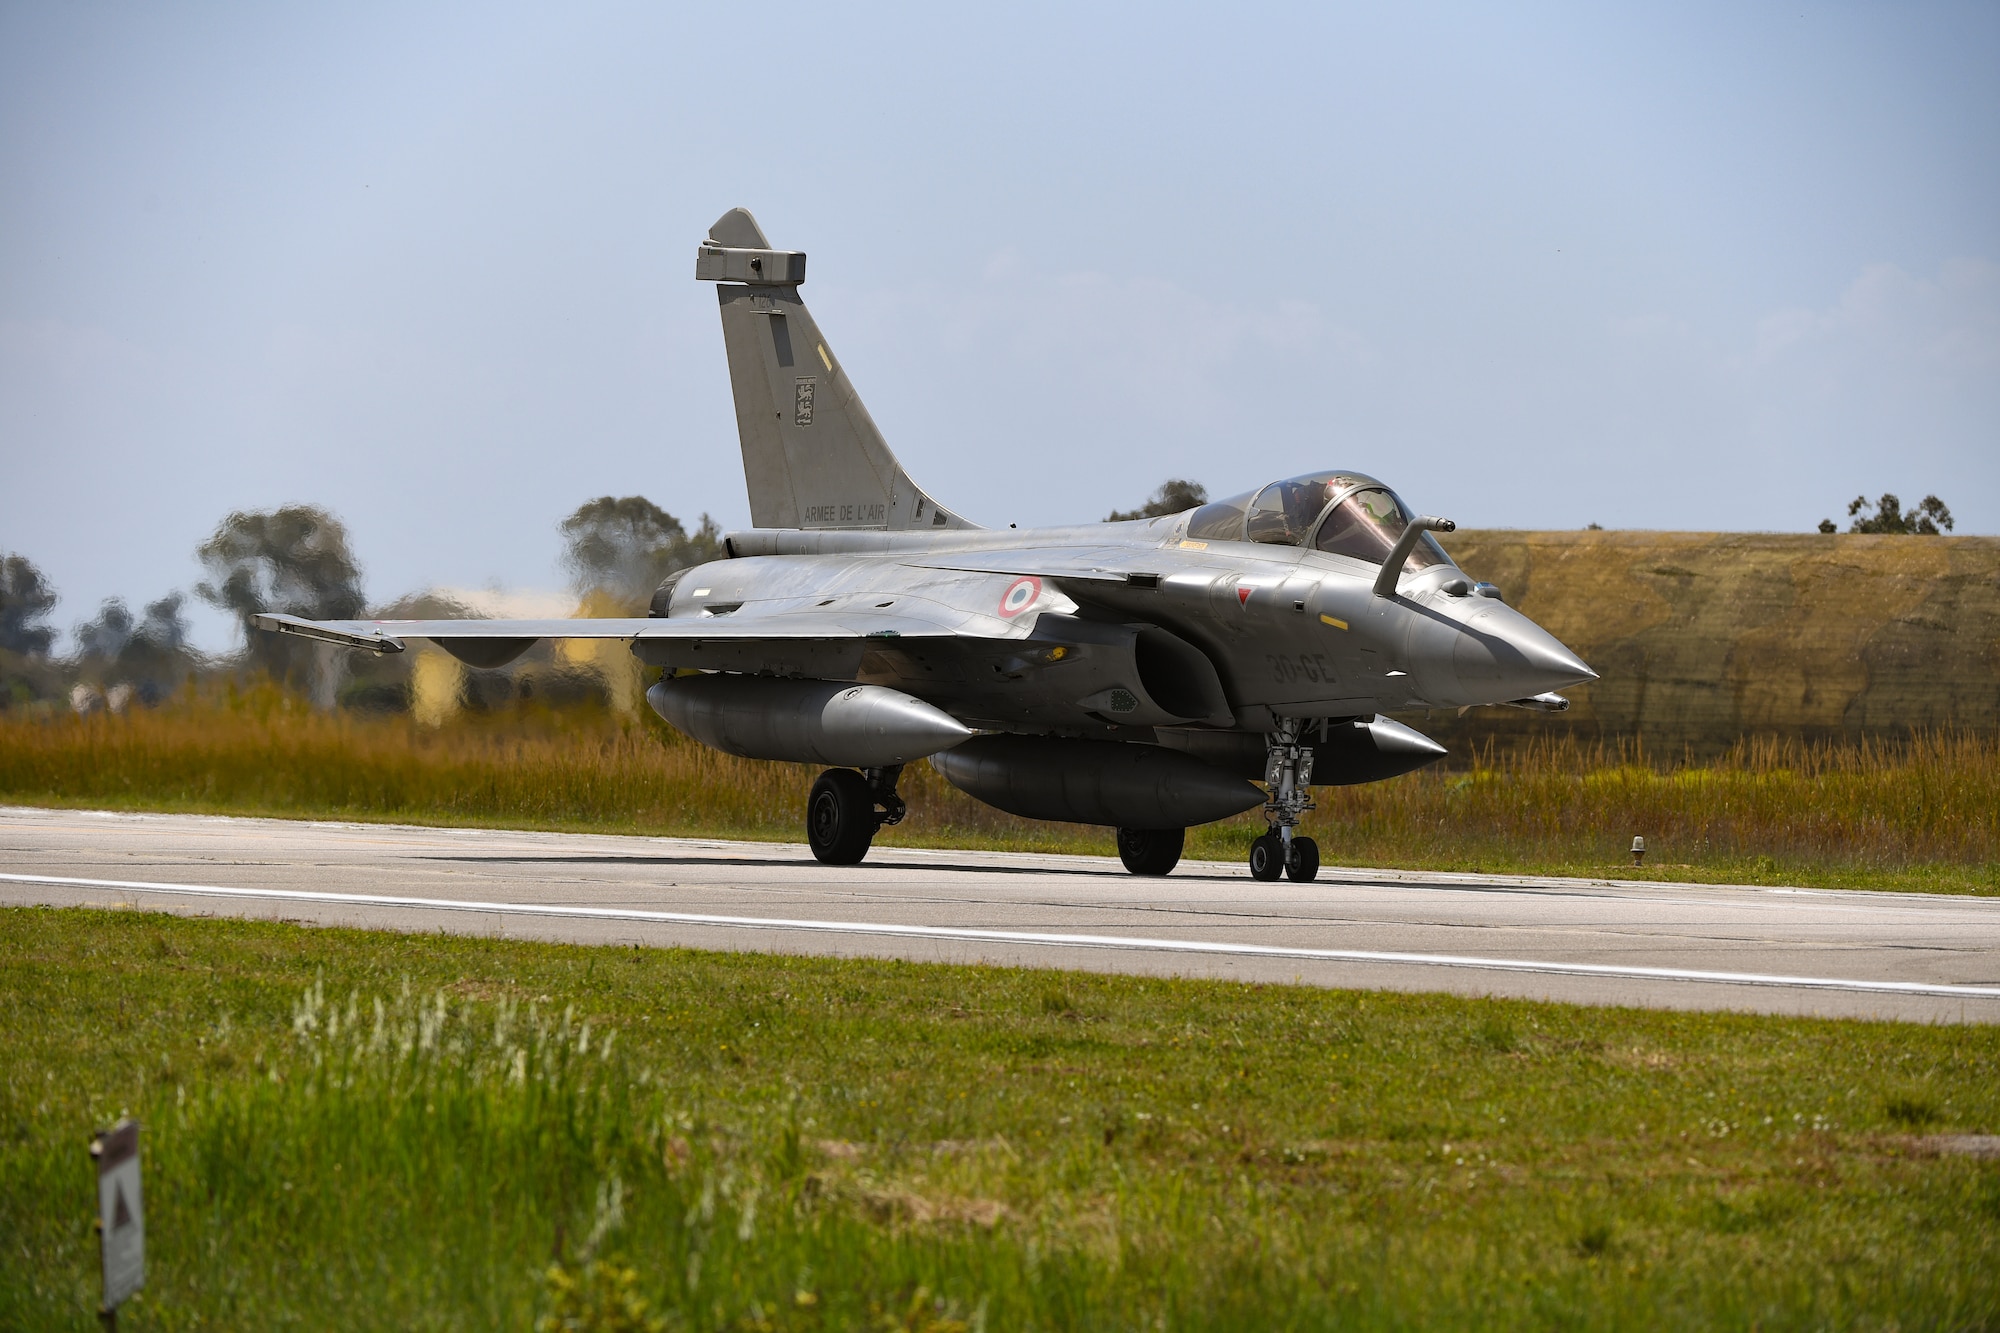 A French air force Rafale aircraft taxis on the runway at Andravida Air Base, Greece, April 7, 2021. The French air force arrived in Greece to participate in INIOCHOS 21. In addition to enhancing combat readiness and strengthening bonds, INIOCHOS provides participants the opportunity for developing capabilities in planning and conducting complex air operations in a multinational joint forces environment, leading to an advanced level of training for all participants. (U.S. Air Force photo by Airman 1st Class Thomas S. Keisler IV)